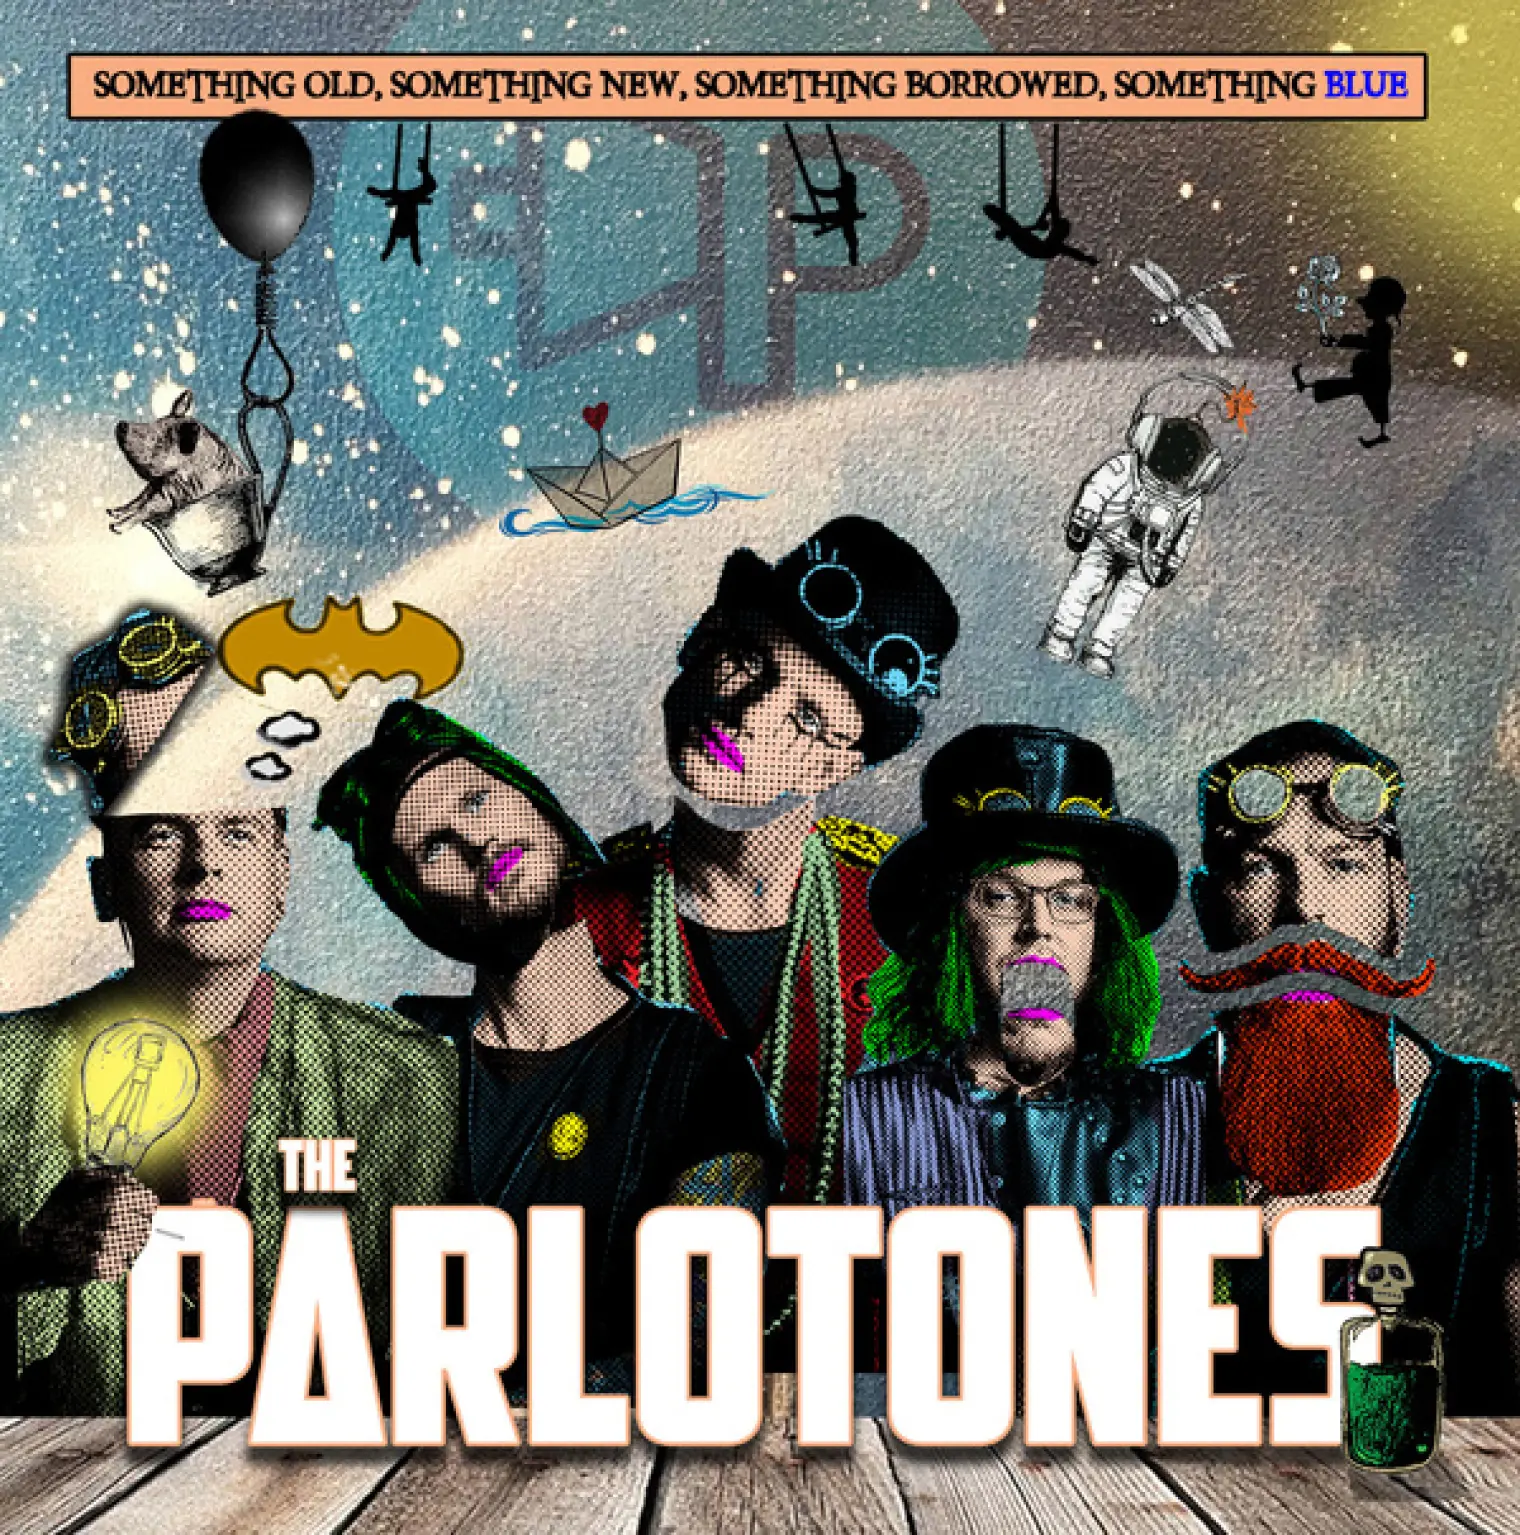 Louder than Bombs -  The Parlotones 